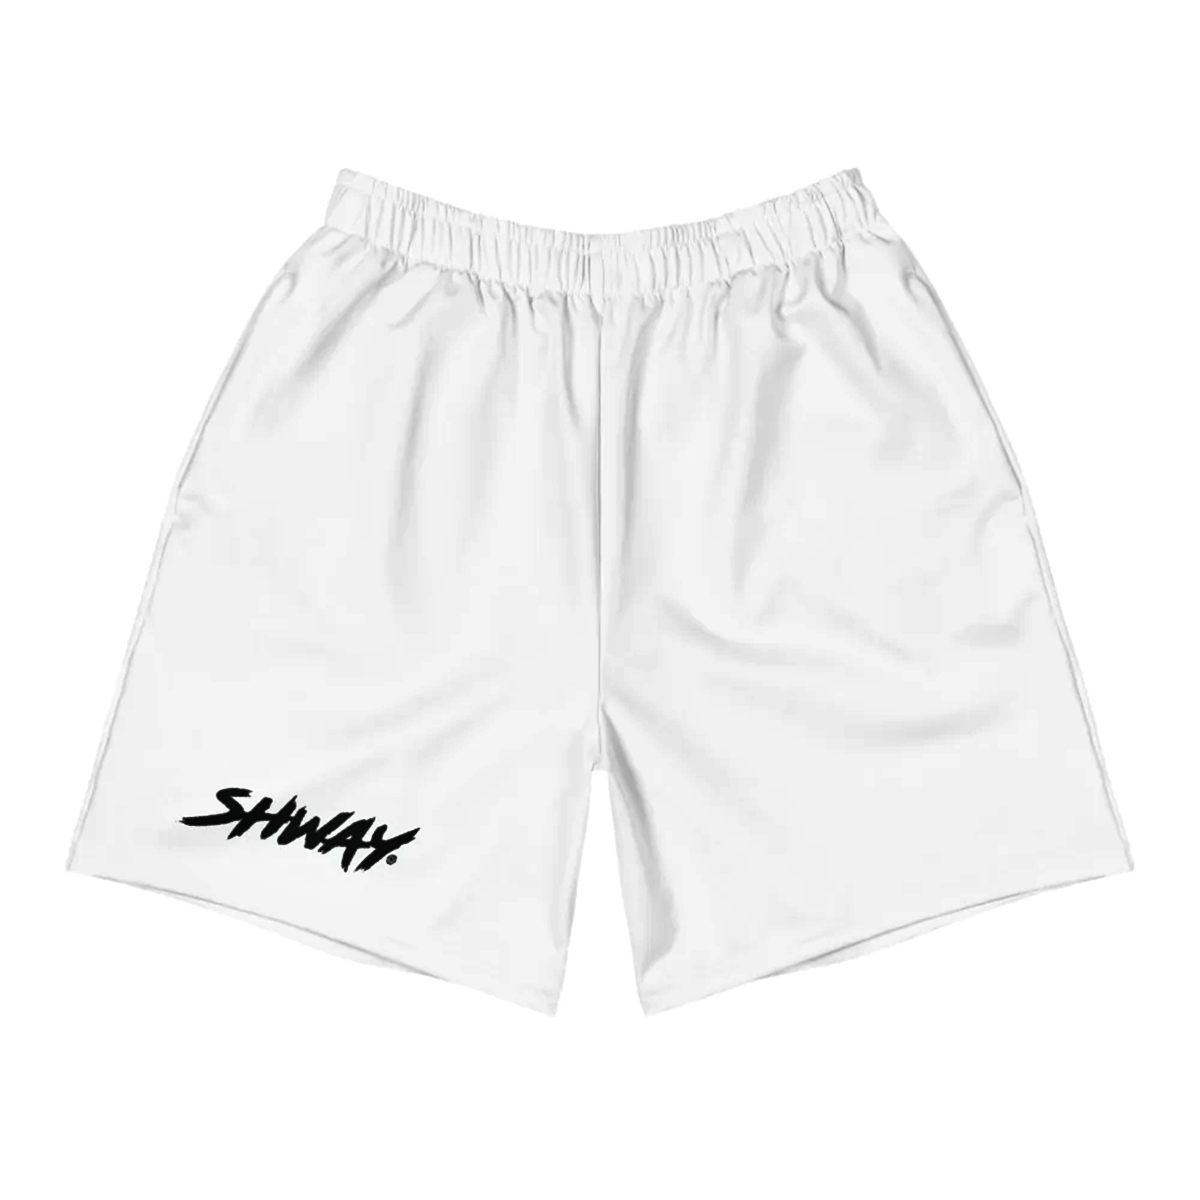 14 Incredible Men’s White Athletic Shorts For 2023